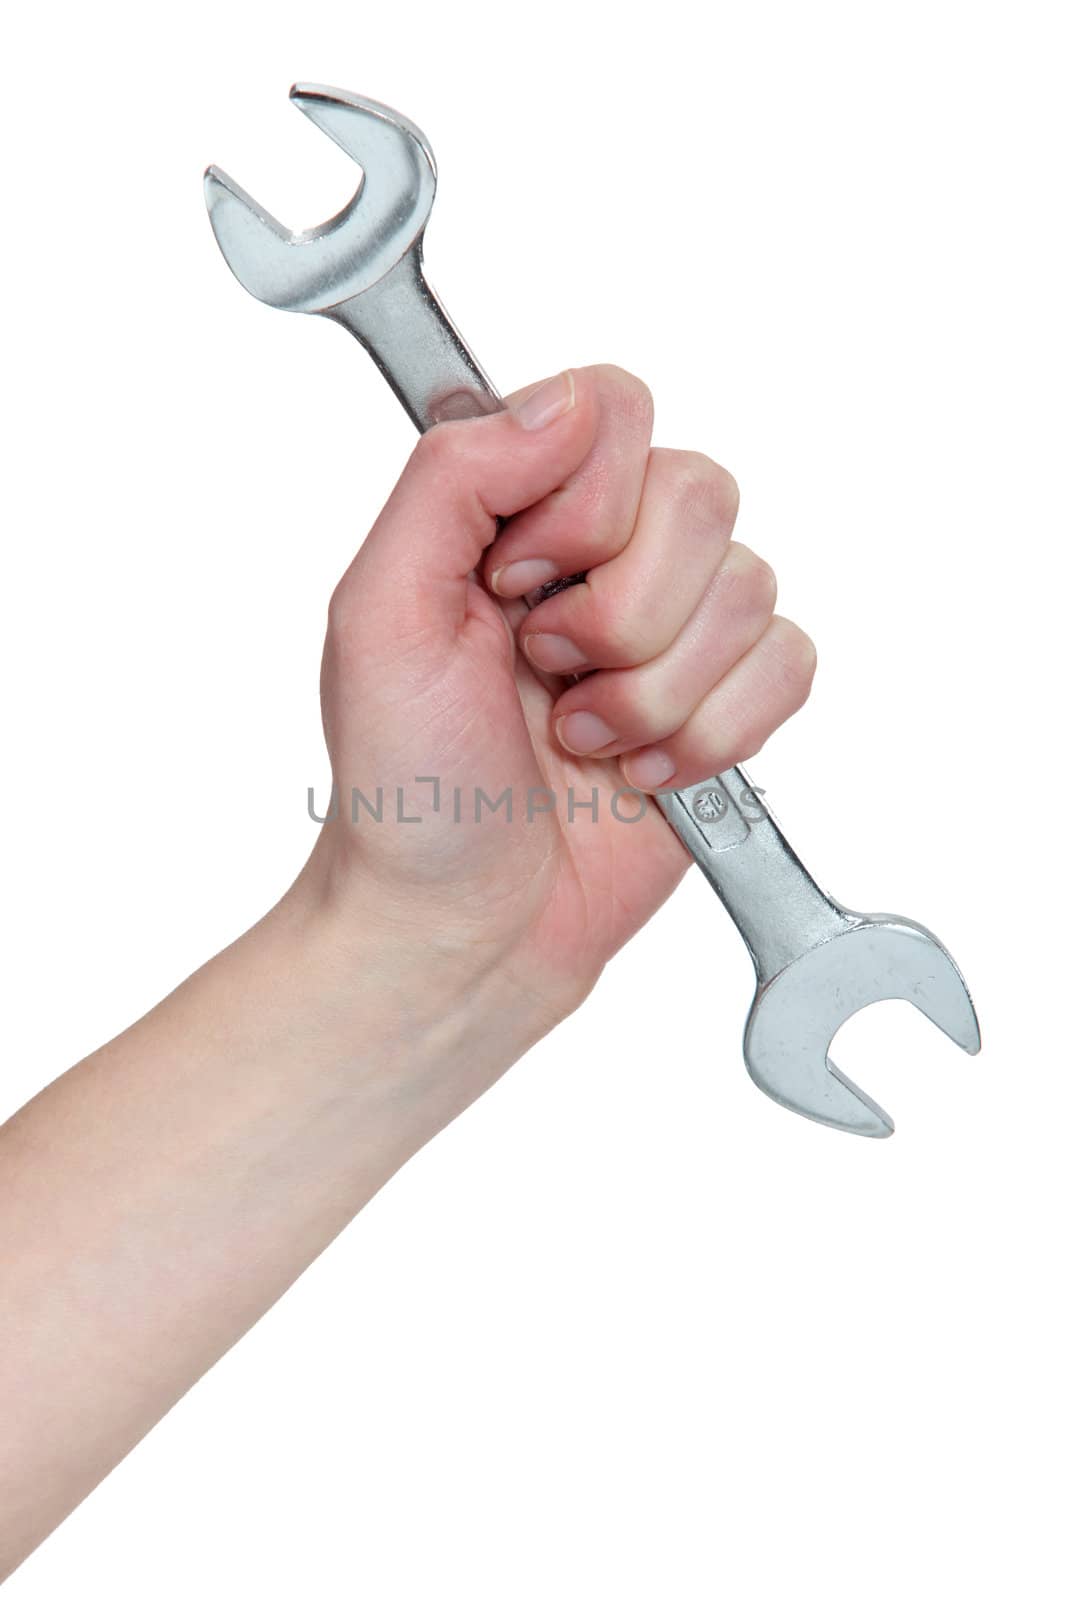 Hand holding a spanner by phovoir